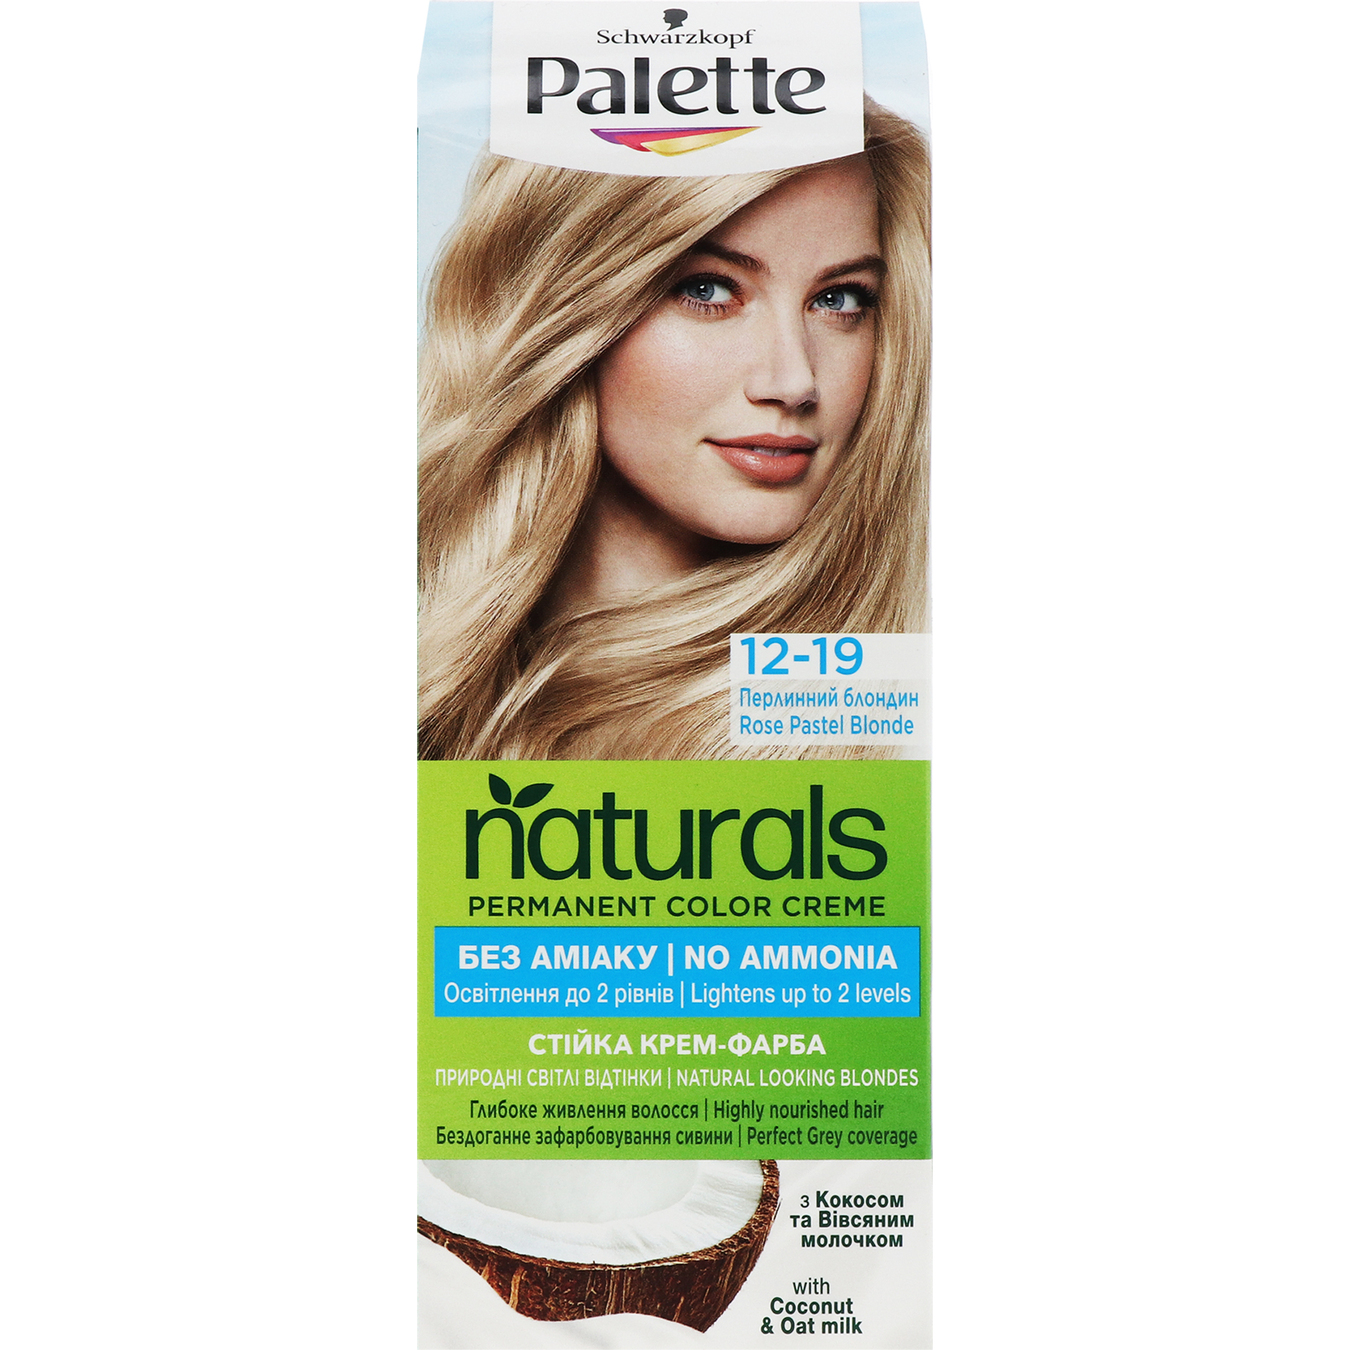 Cream-dye Palette Naturals 12-19 Pearl blonde without ammonia permanent hair color 110ml